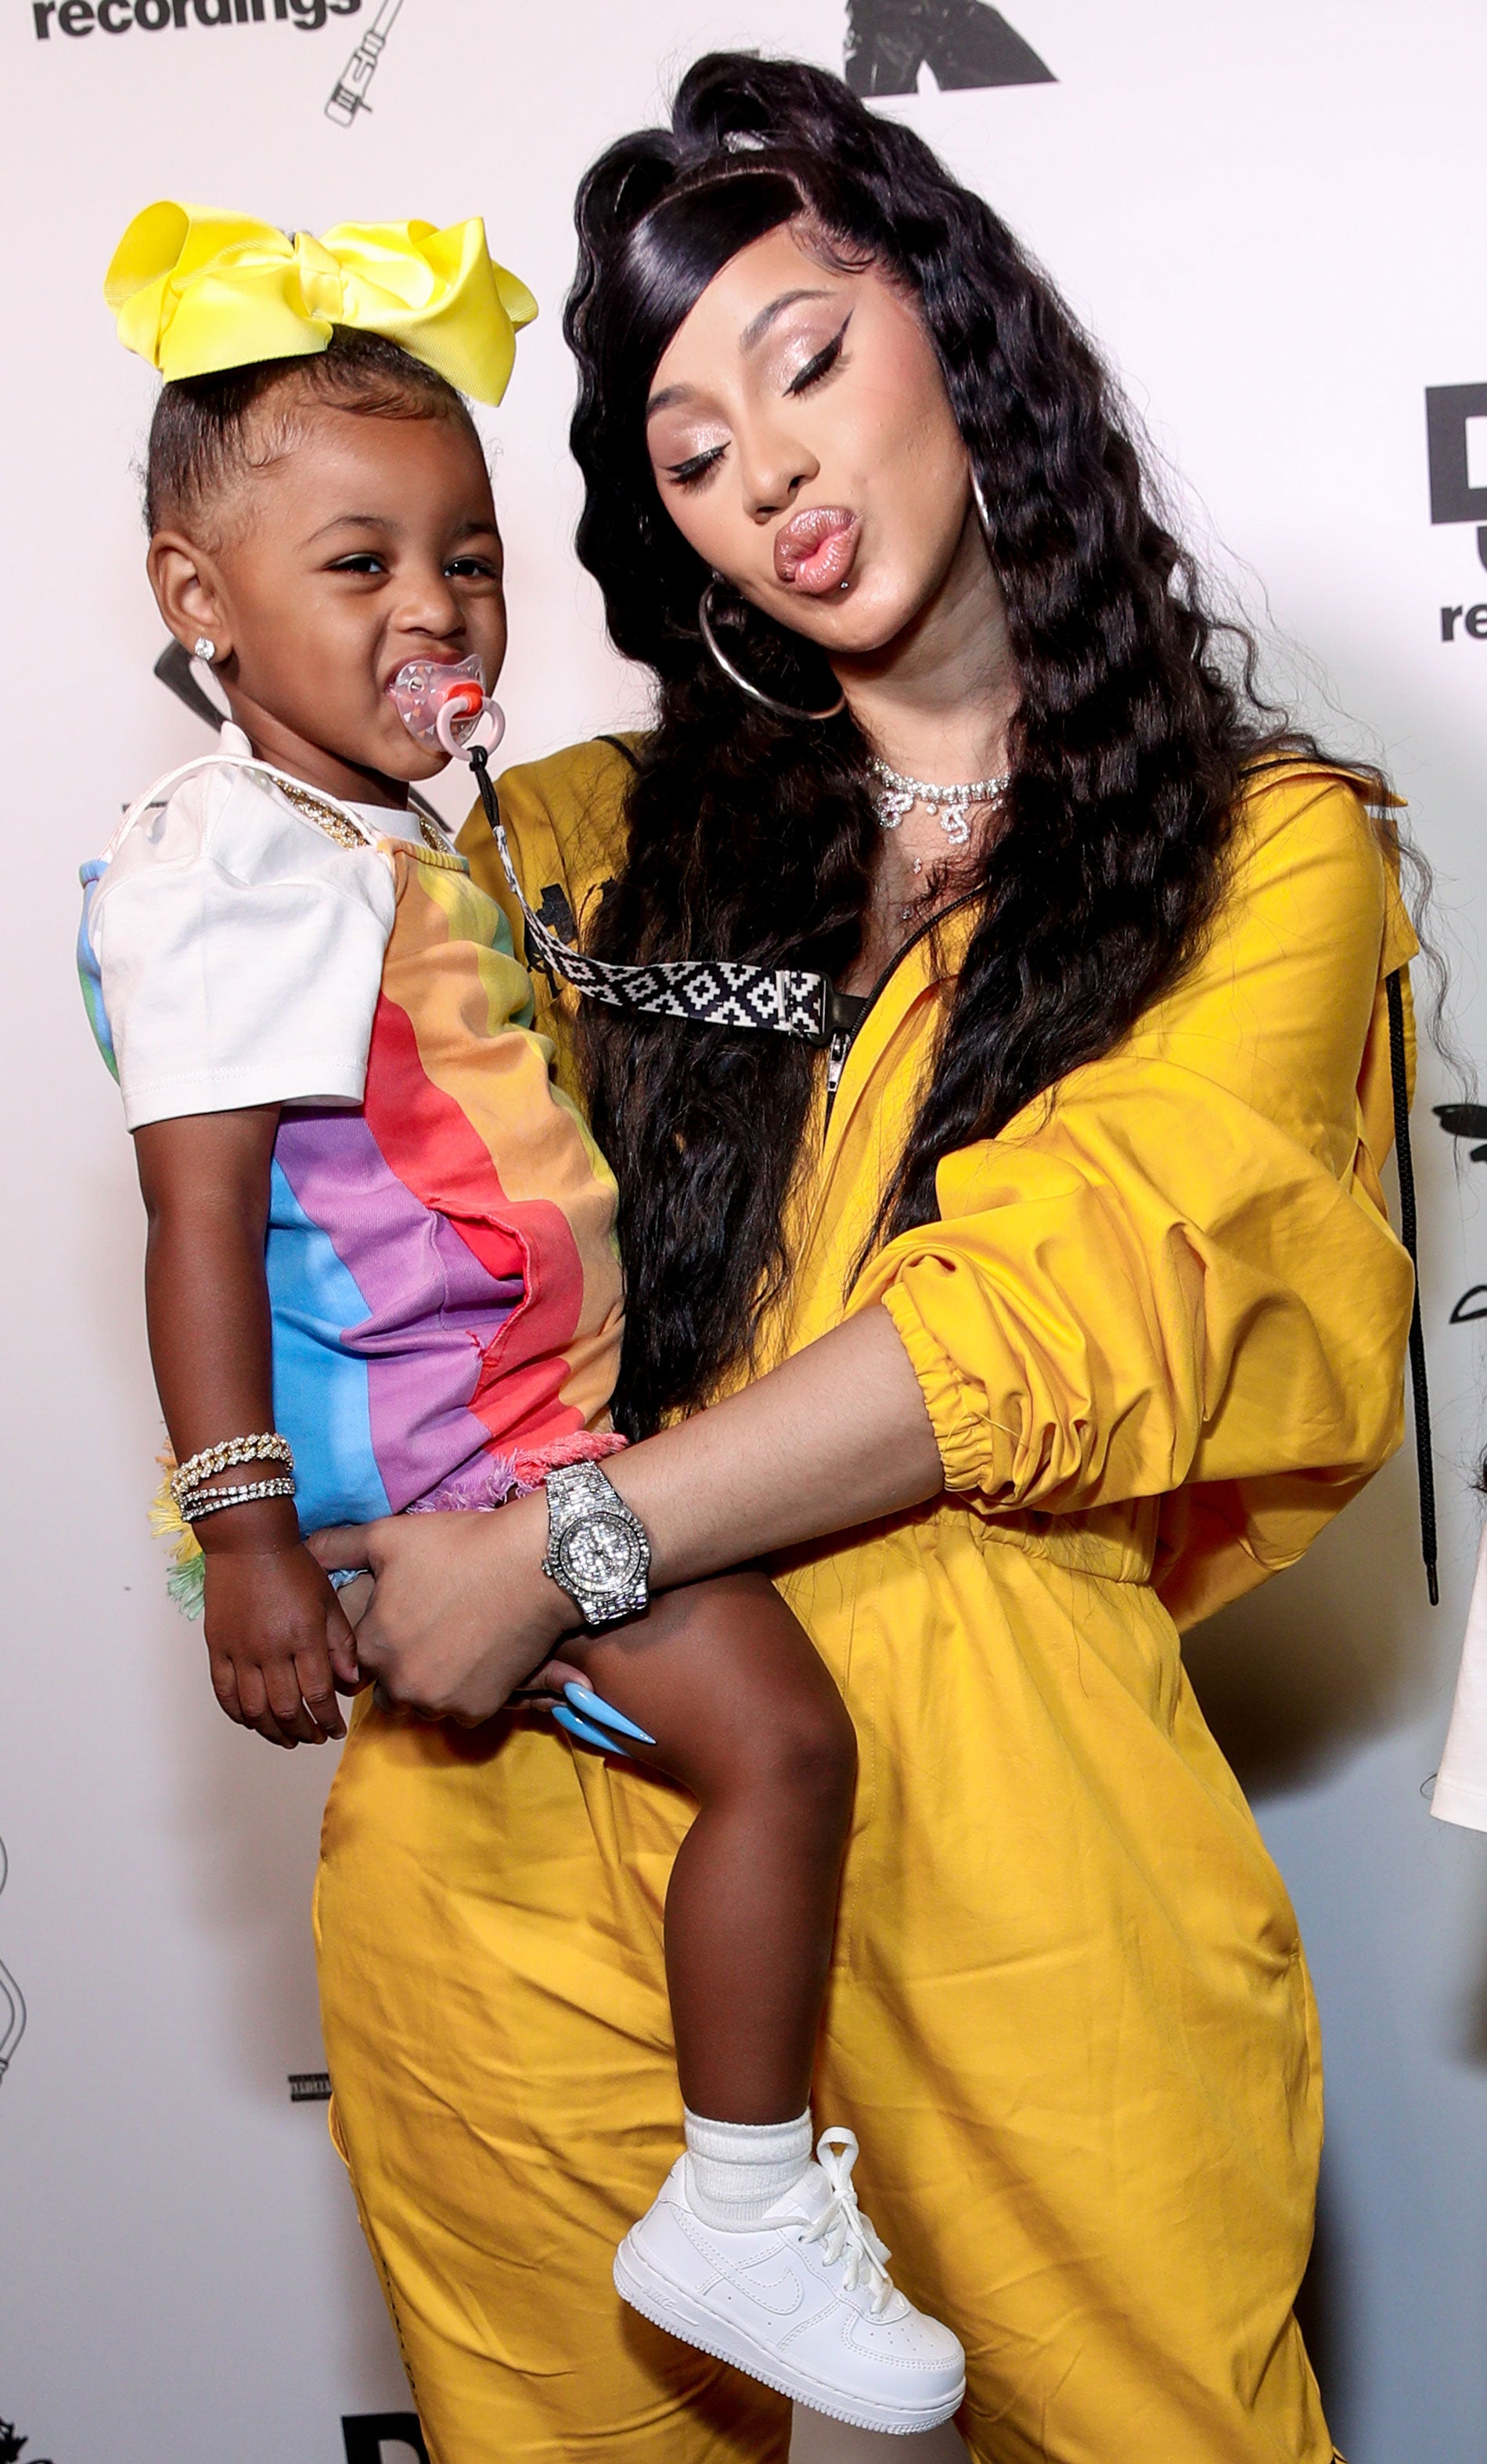 Offset and Cardi B Buy Hermès Birkin for 2-Year-Old Daughter